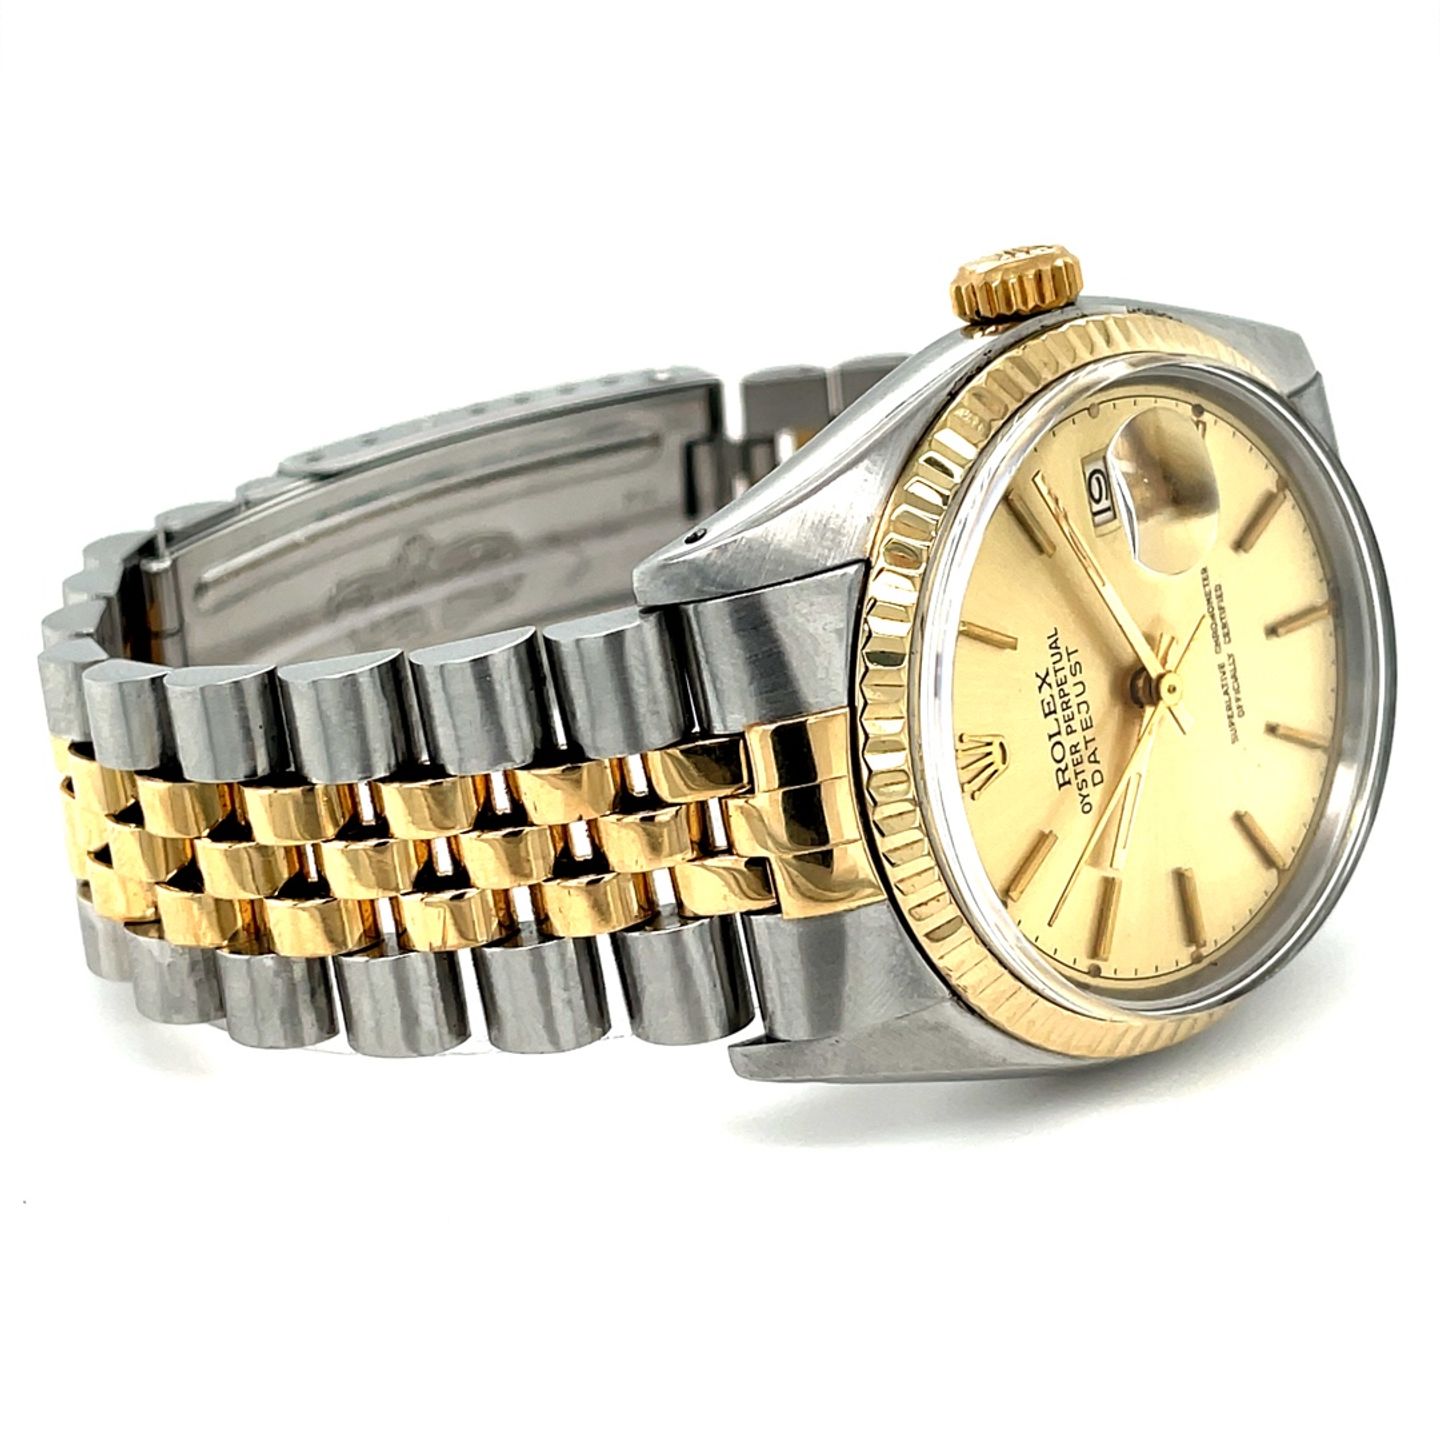 Rolex Datejust 36 16013 (1977) - Champagne dial 36 mm Gold/Steel case (4/8)